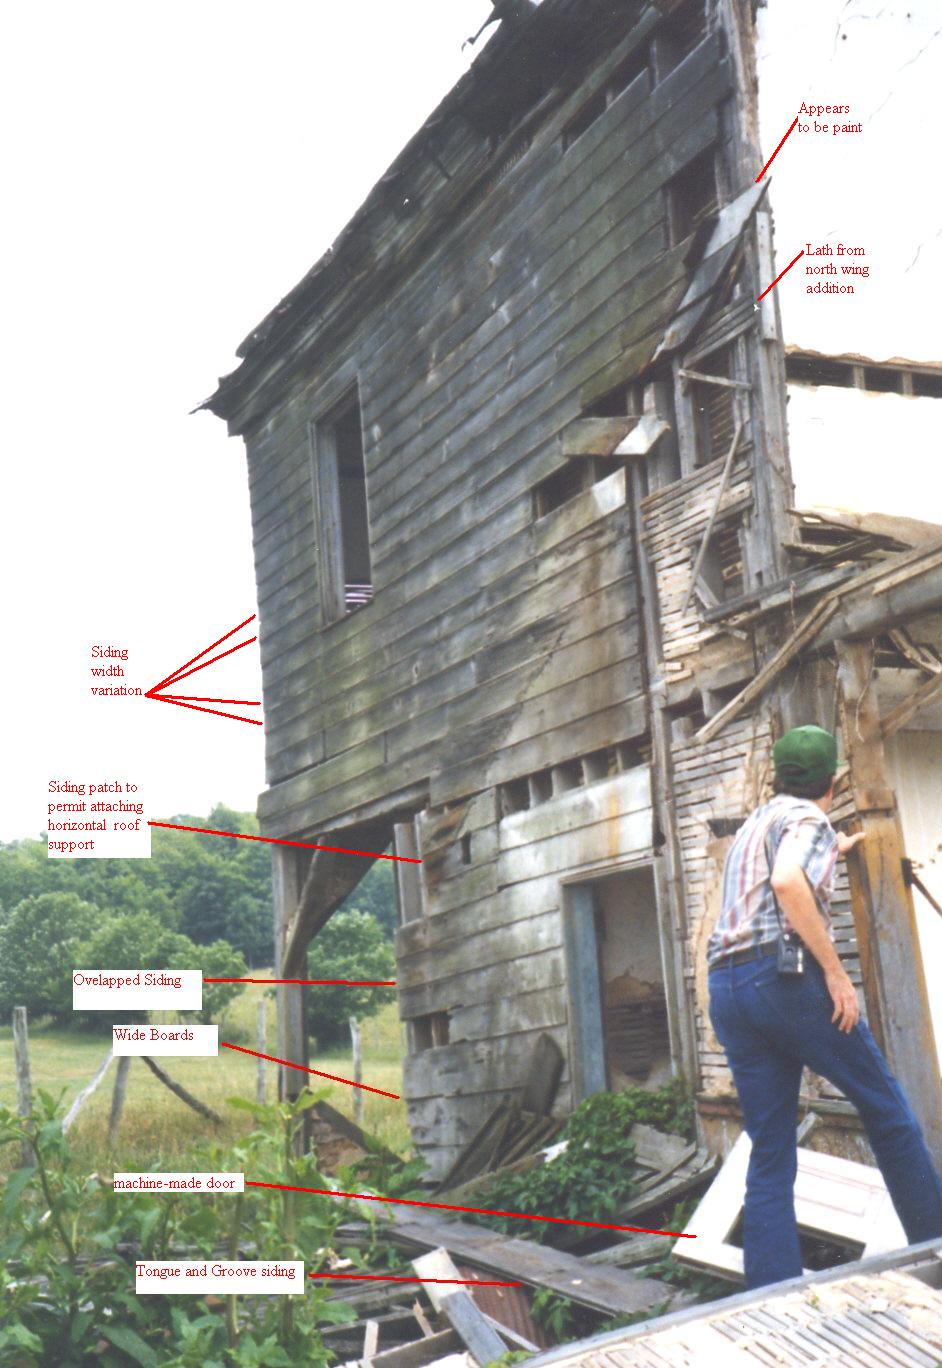 Rear of house on Michael Korns, Sr. farm, Somerset County, PA, showing presence of an addition, and showing several different widths of siding